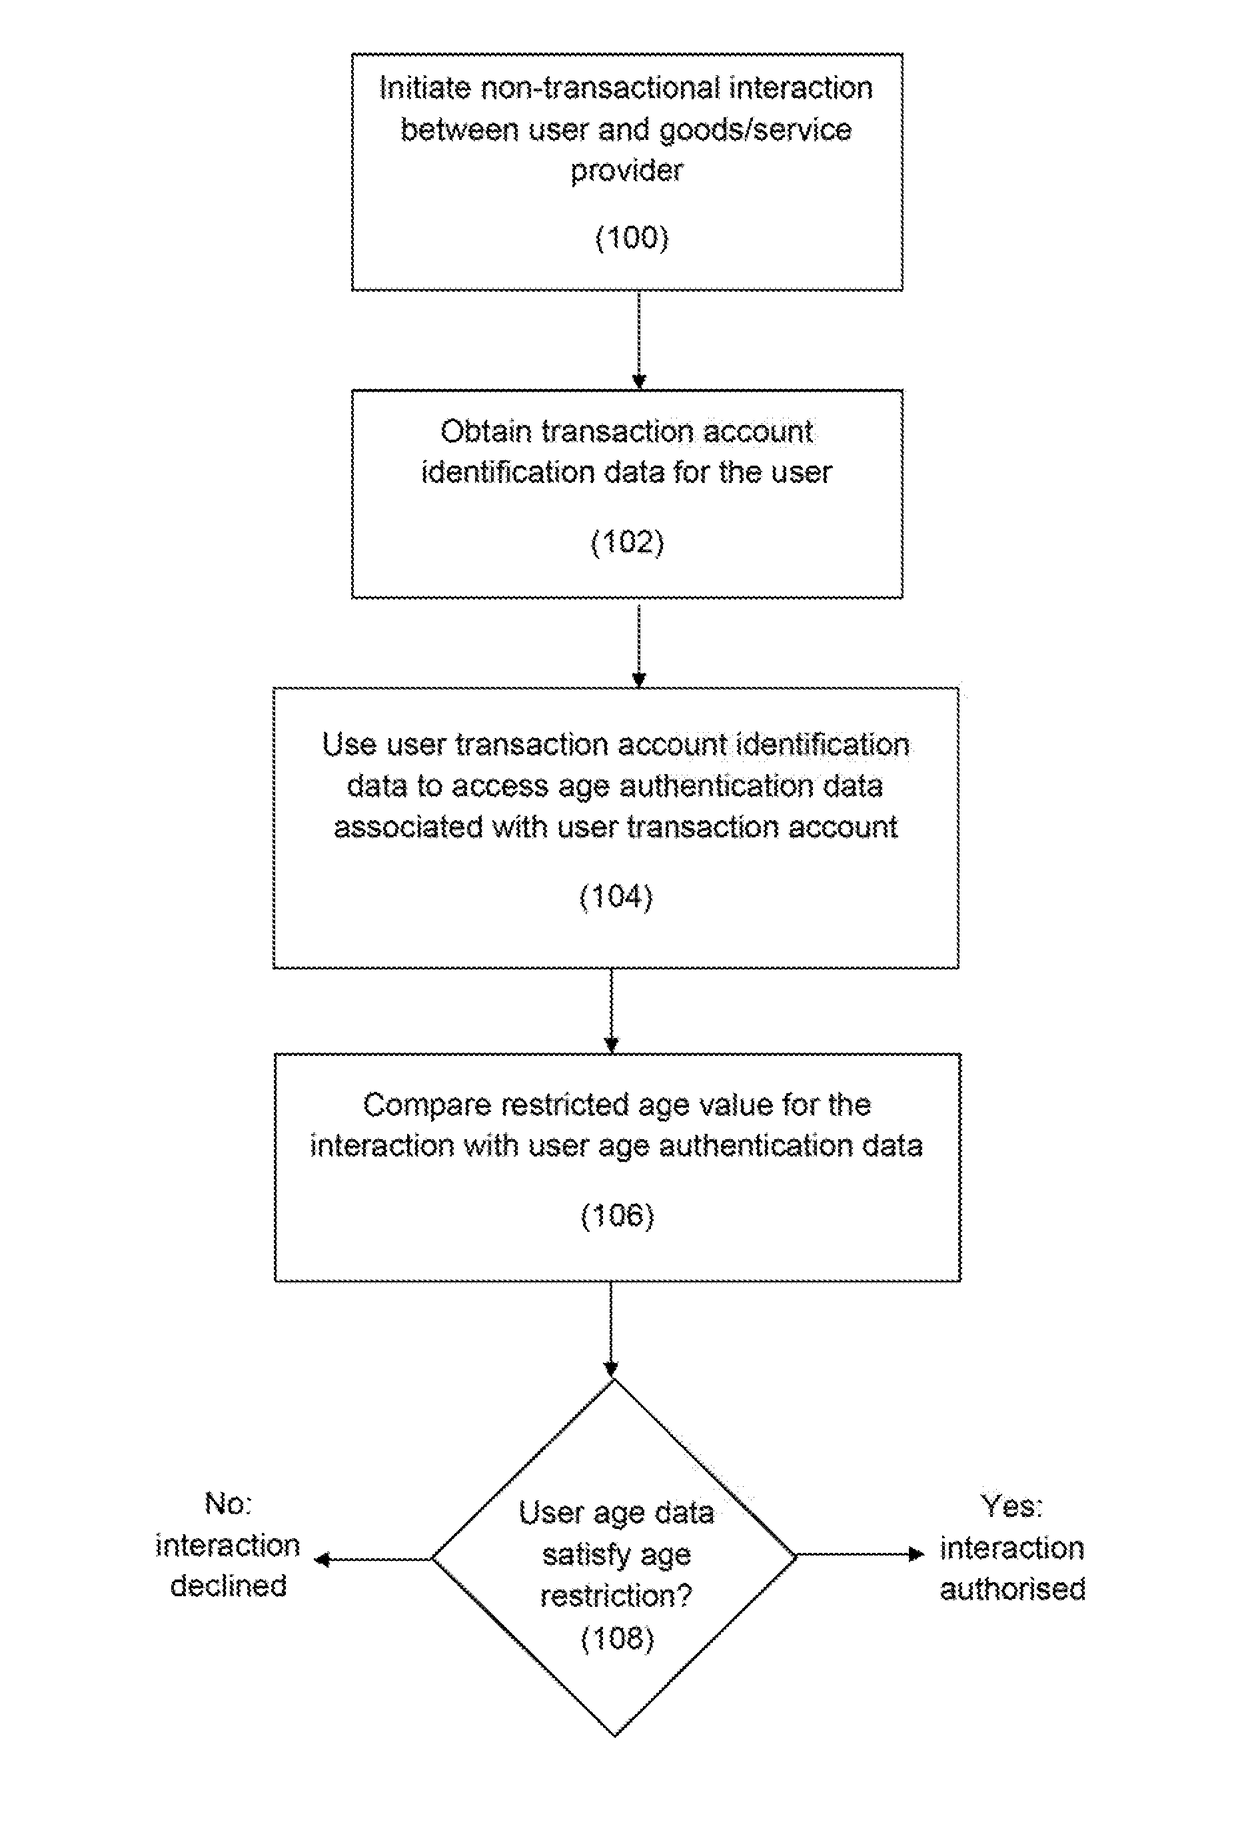 Methods, devices and systems for authorizing an age-restricted interaction